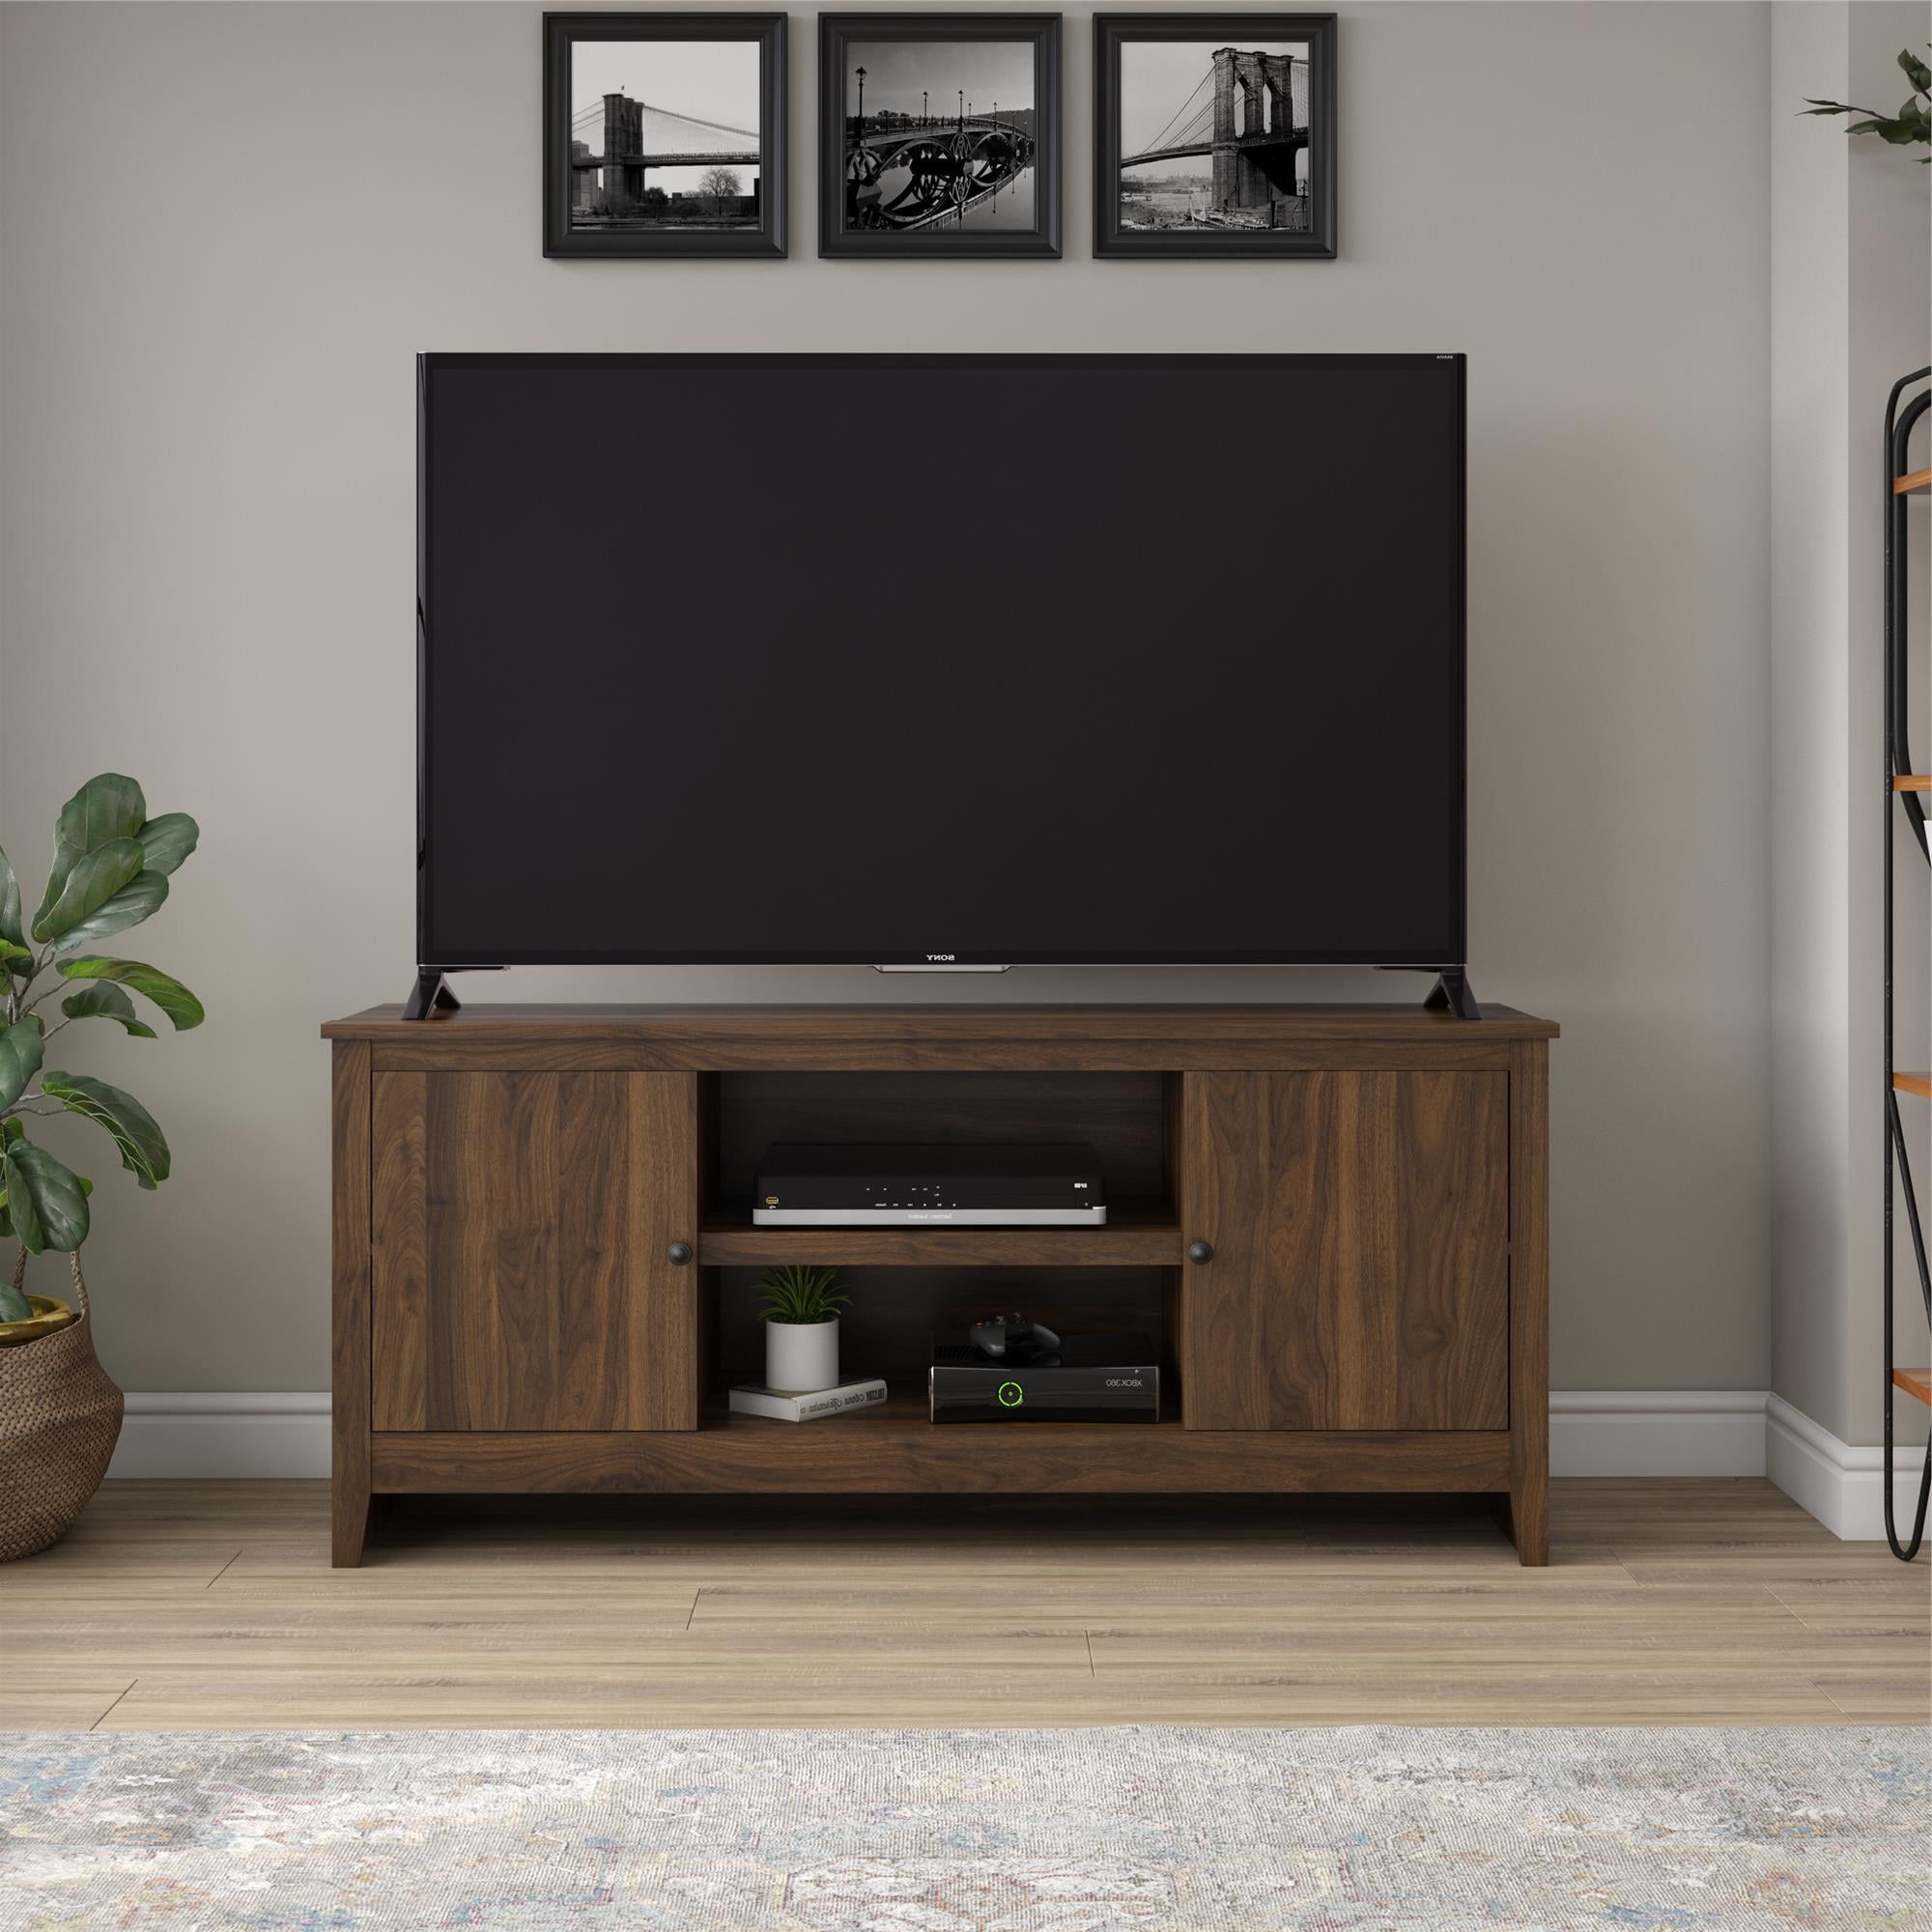 Recent Dual Use Storage Cabinet Tv Stands For Mainstays Tv Stand For Tvs Up To 65", Walnut – Walmart (View 11 of 15)